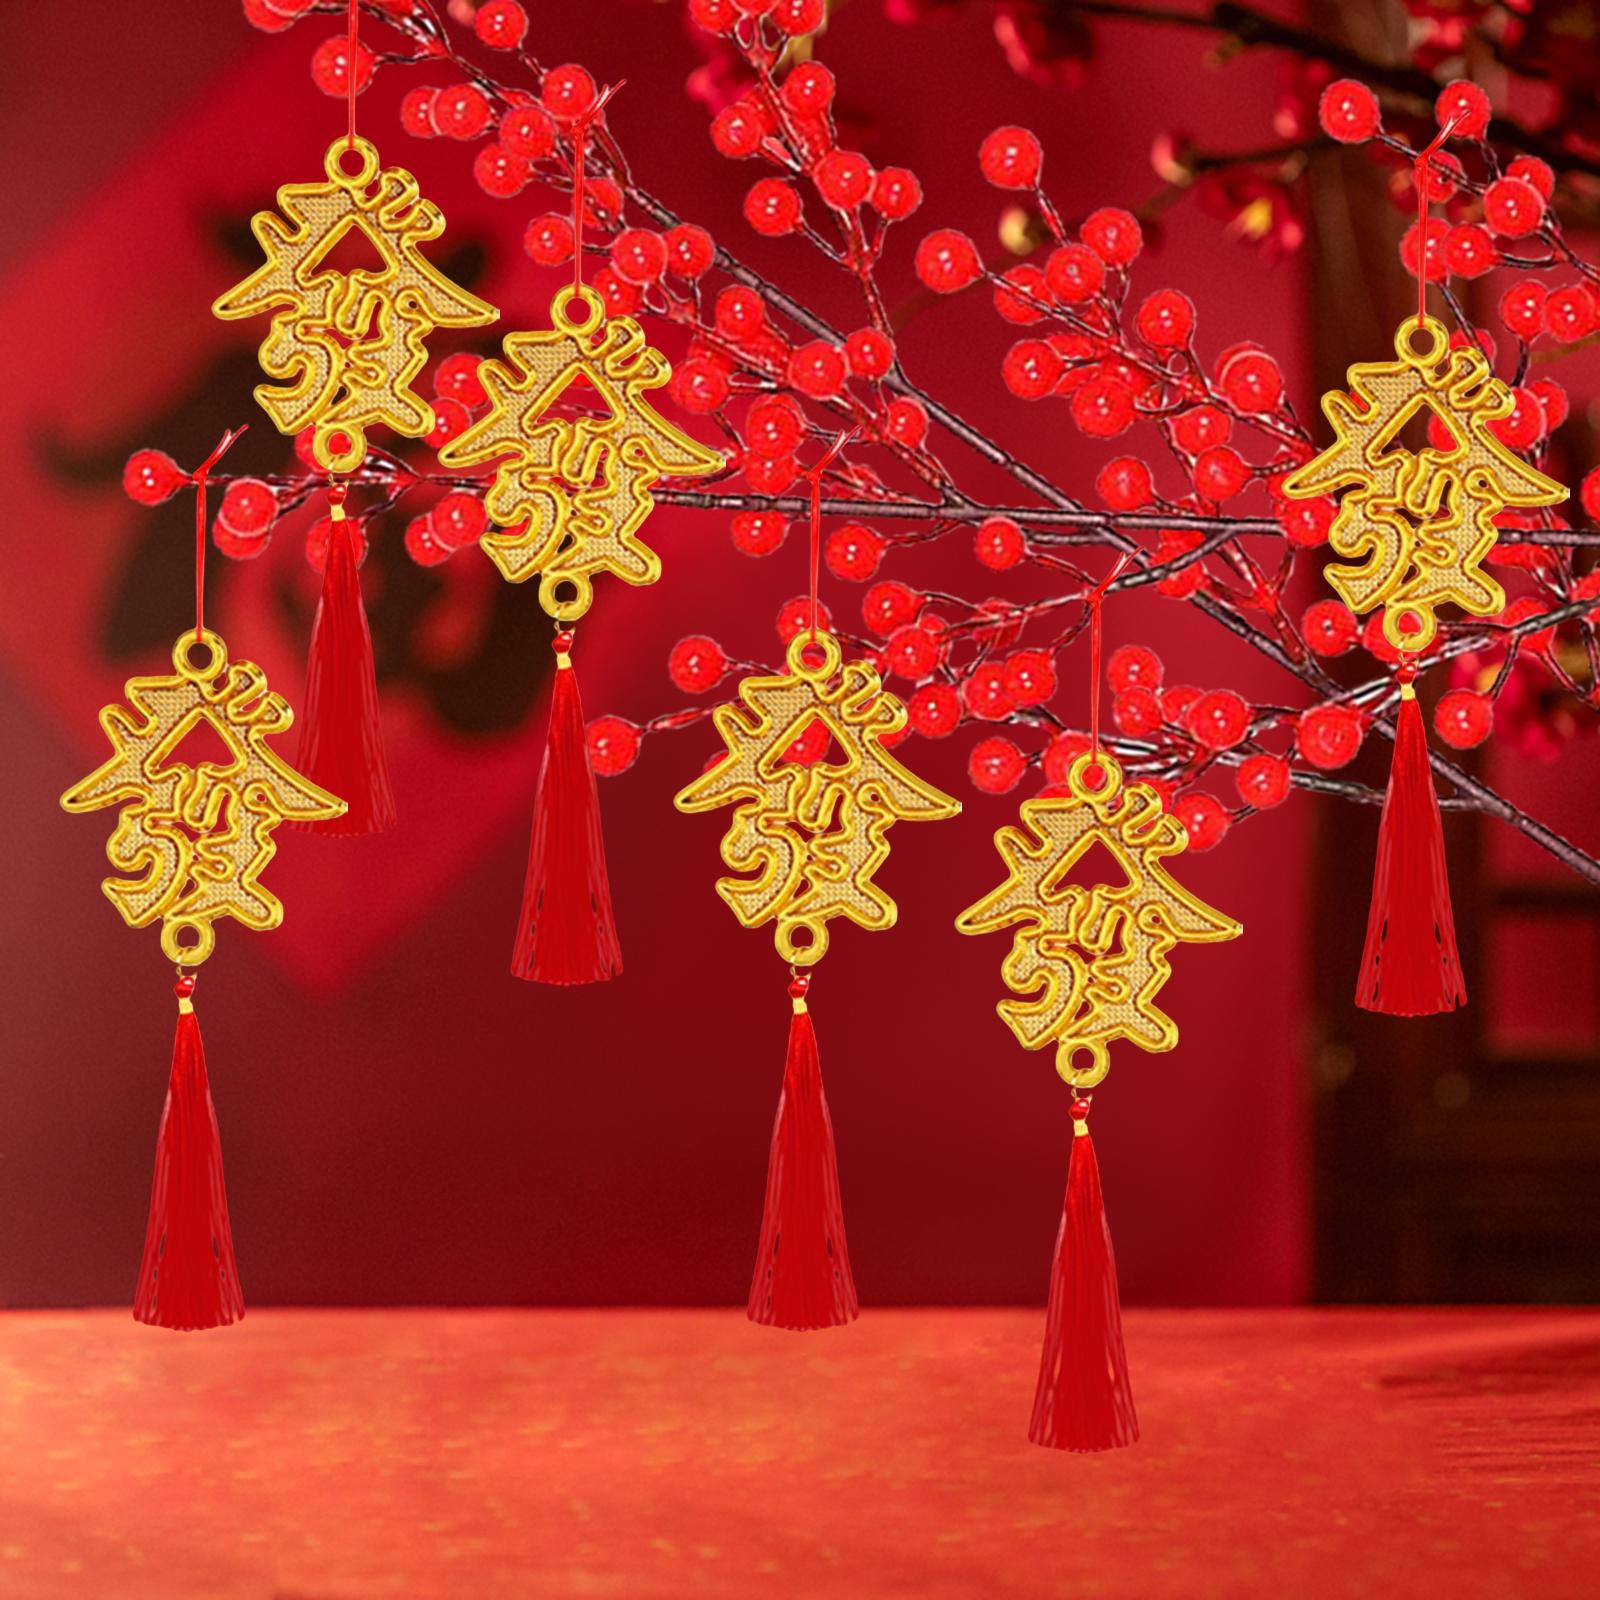 Chinese New Year Decorations Pendant for Potted Plants Indoor Outdoor Decor Fa character 6pcs